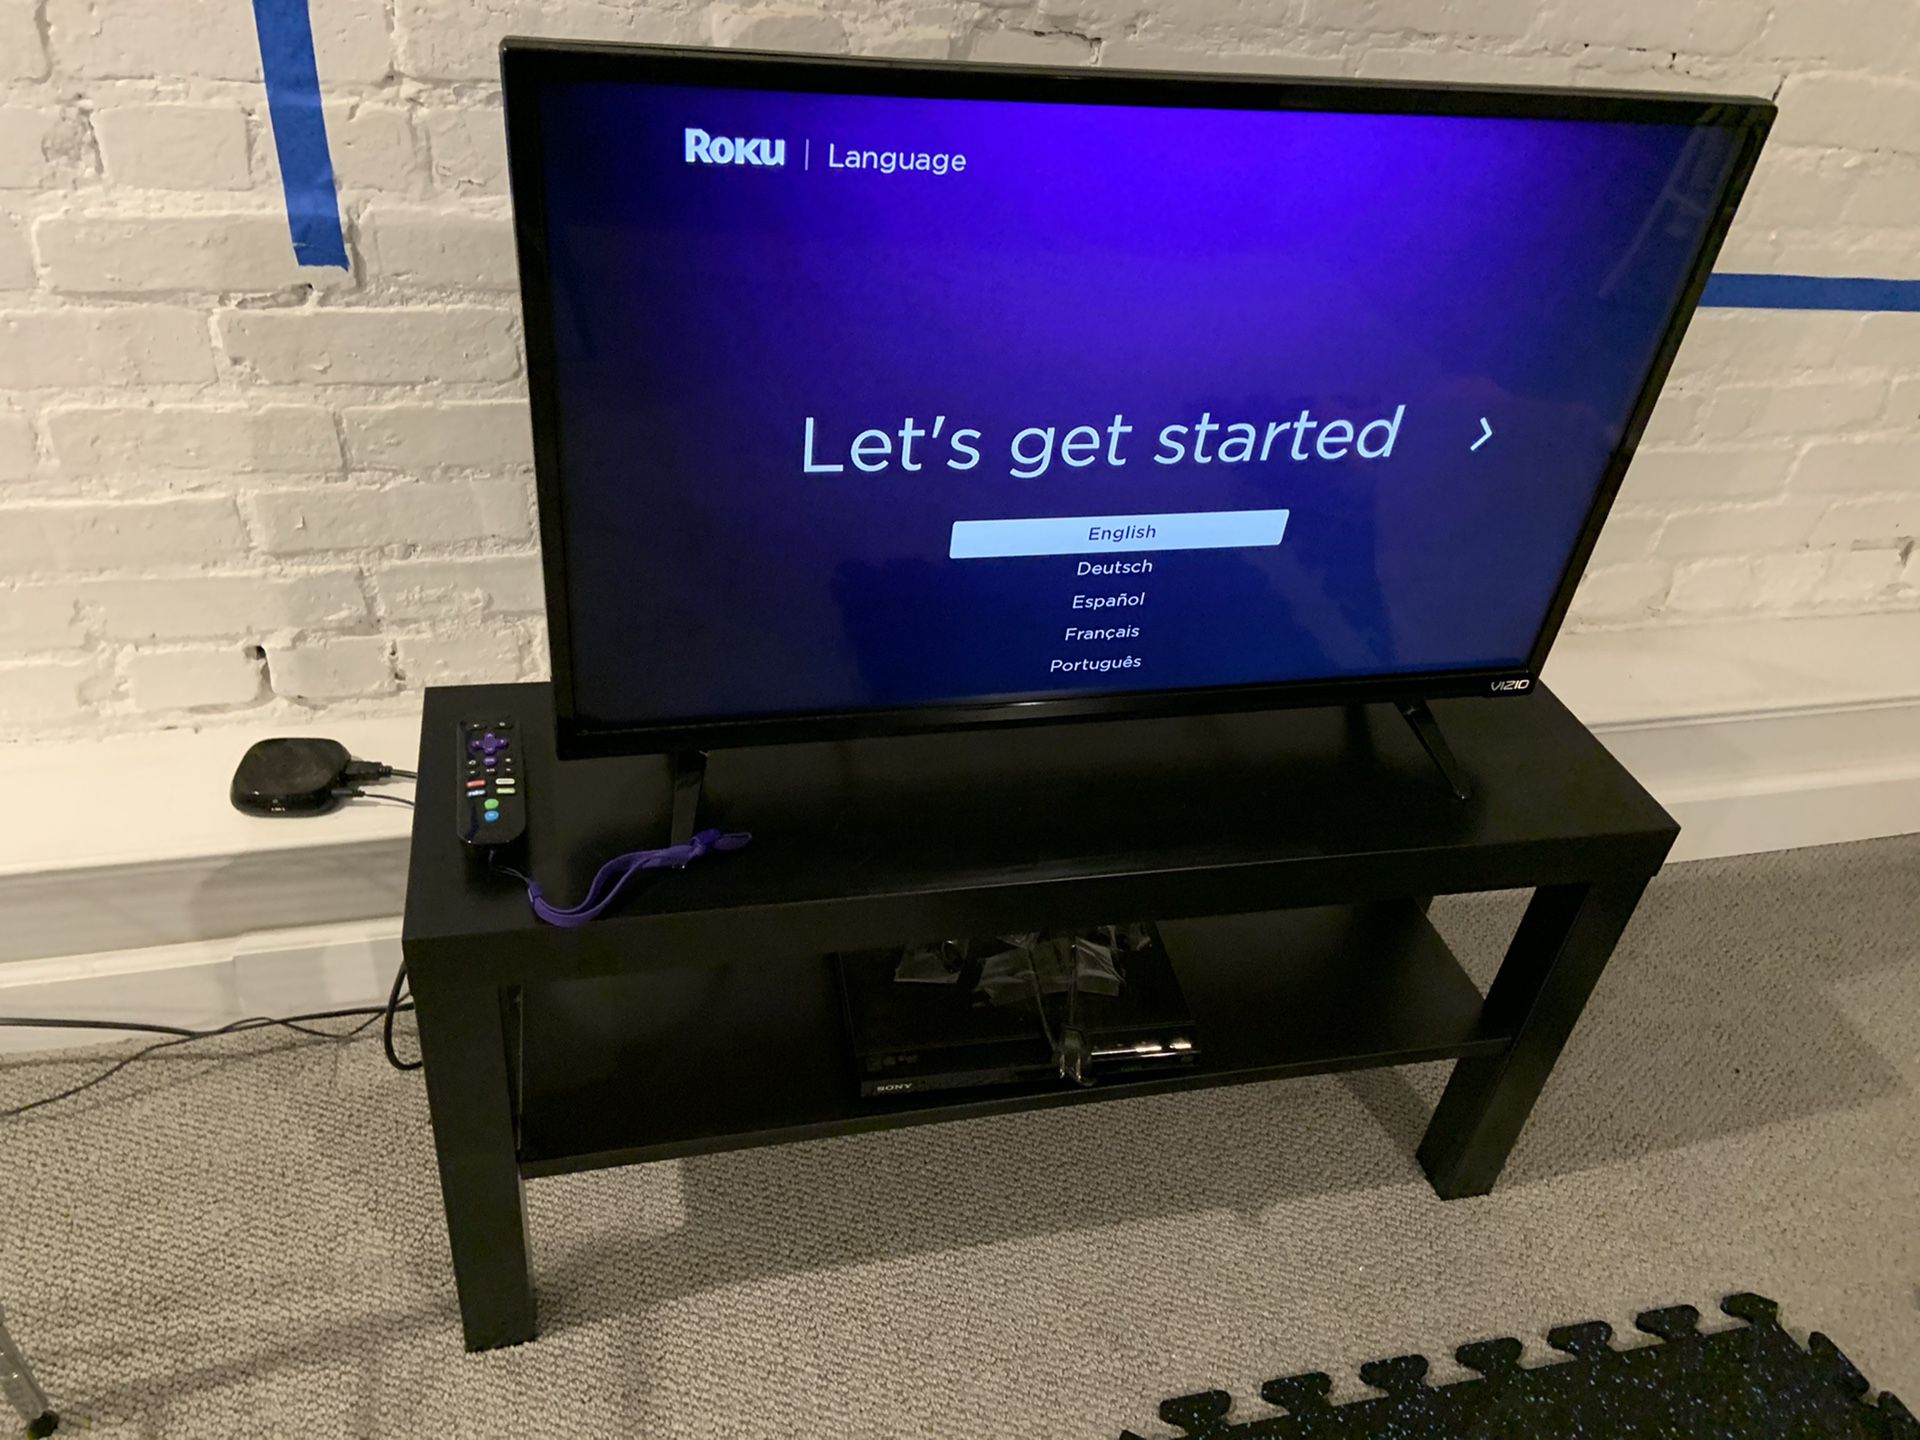 32” TV, stand, and Roku. All-in-one package